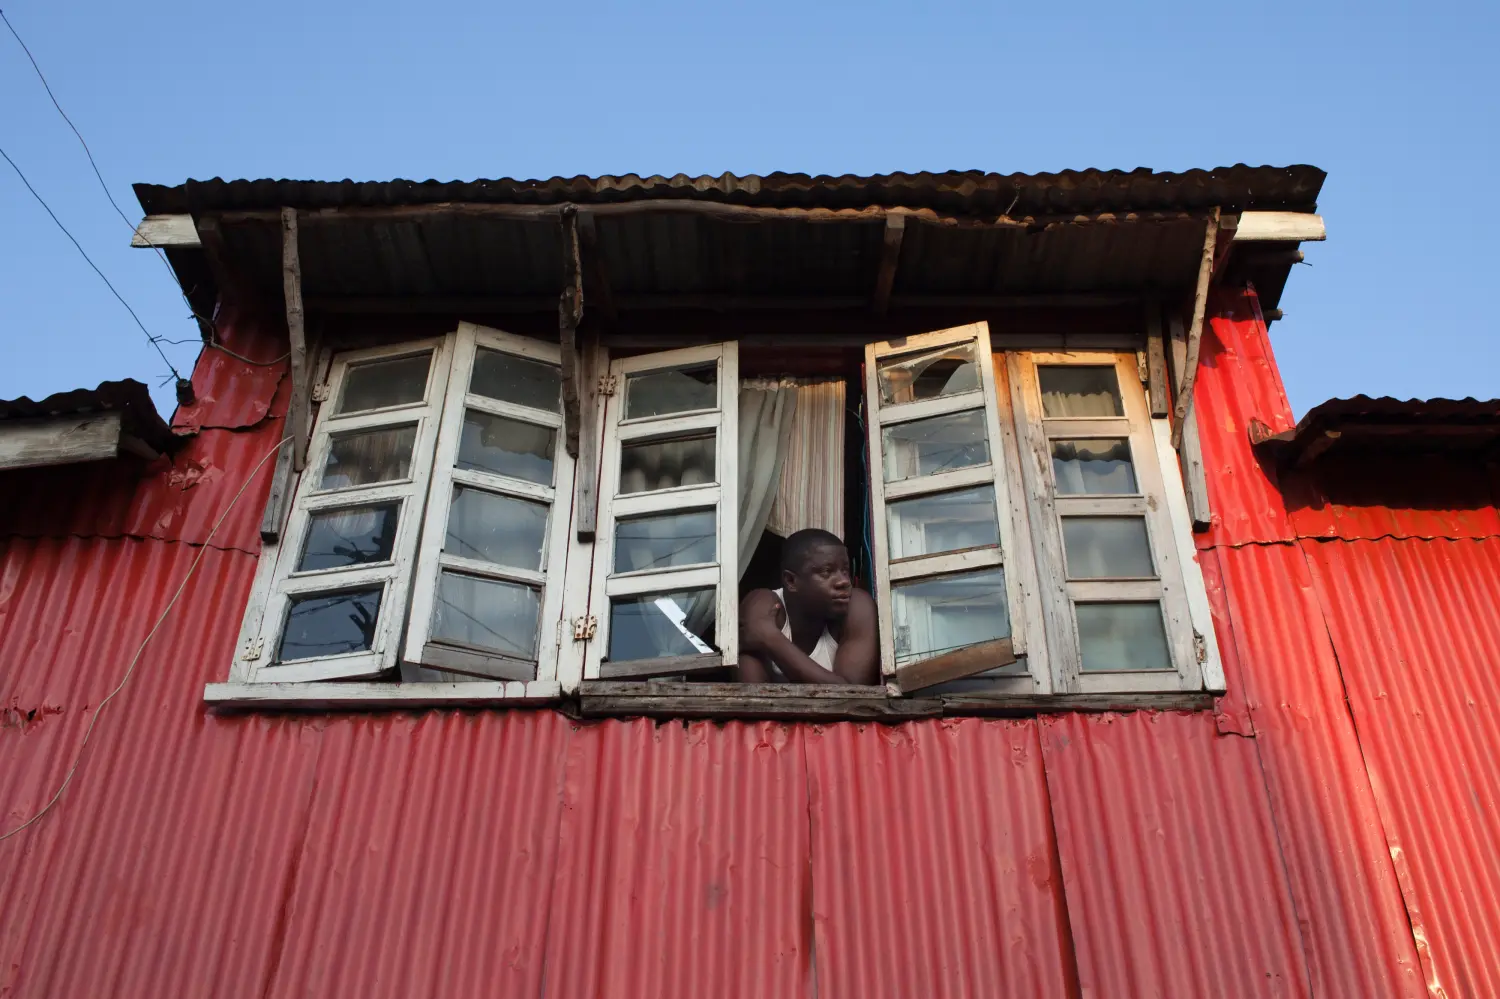 A man looks out of the window of his colonial-era house in Freetown, Sierra Leone November 19, 2012. Sierra Leone's elections were generally well conducted, saw a large turnout, and will help consolidate democracy in the West African state if the eventual results are accepted peacefully by the contenders, European Union observers said on Monday. REUTERS/Joe Penney (SIERRA LEONE - Tags: POLITICS ELECTIONS SOCIETY) - GM1E8BJ1MSC01